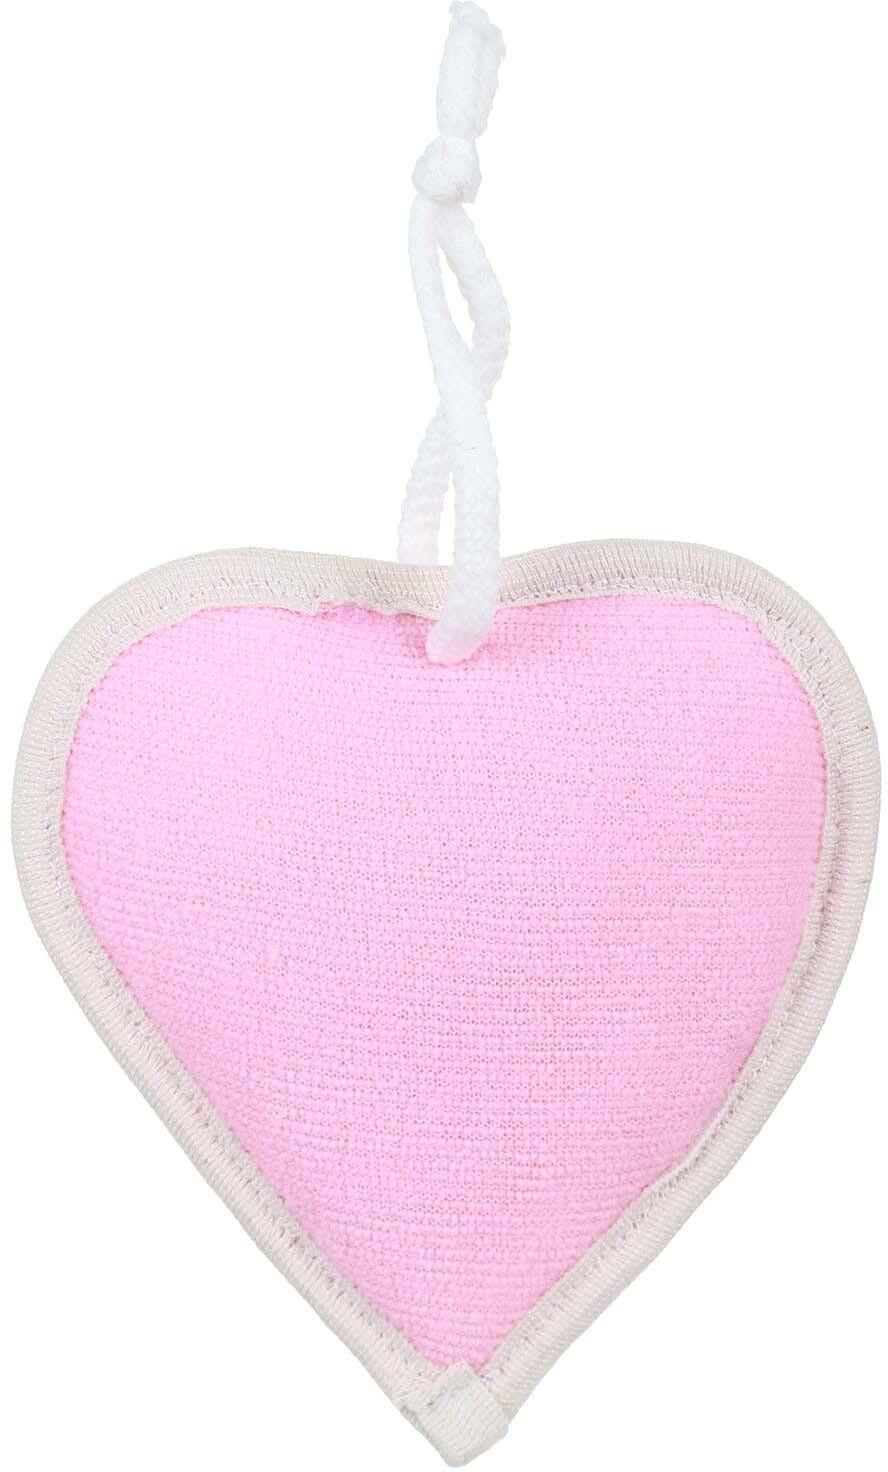 Get Time Clean Baby Bath Loofah, 13×16 cm - Pink with best offers | Raneen.com